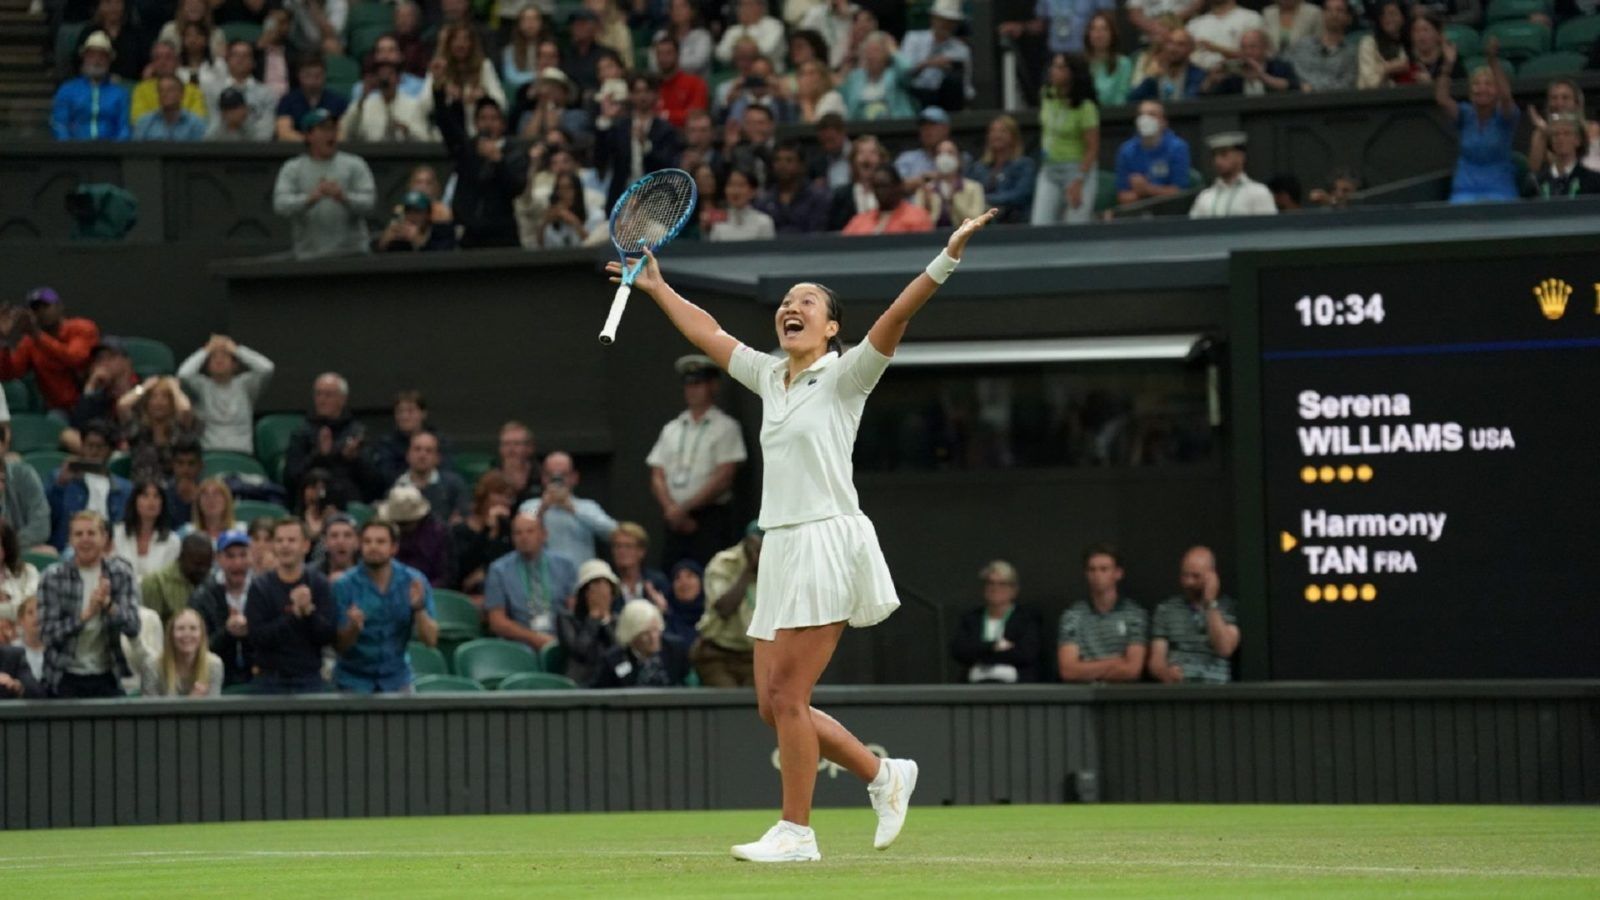 About Harmony Tan, the French tennis player who defeated Serena Williams at Wimbledon 2022